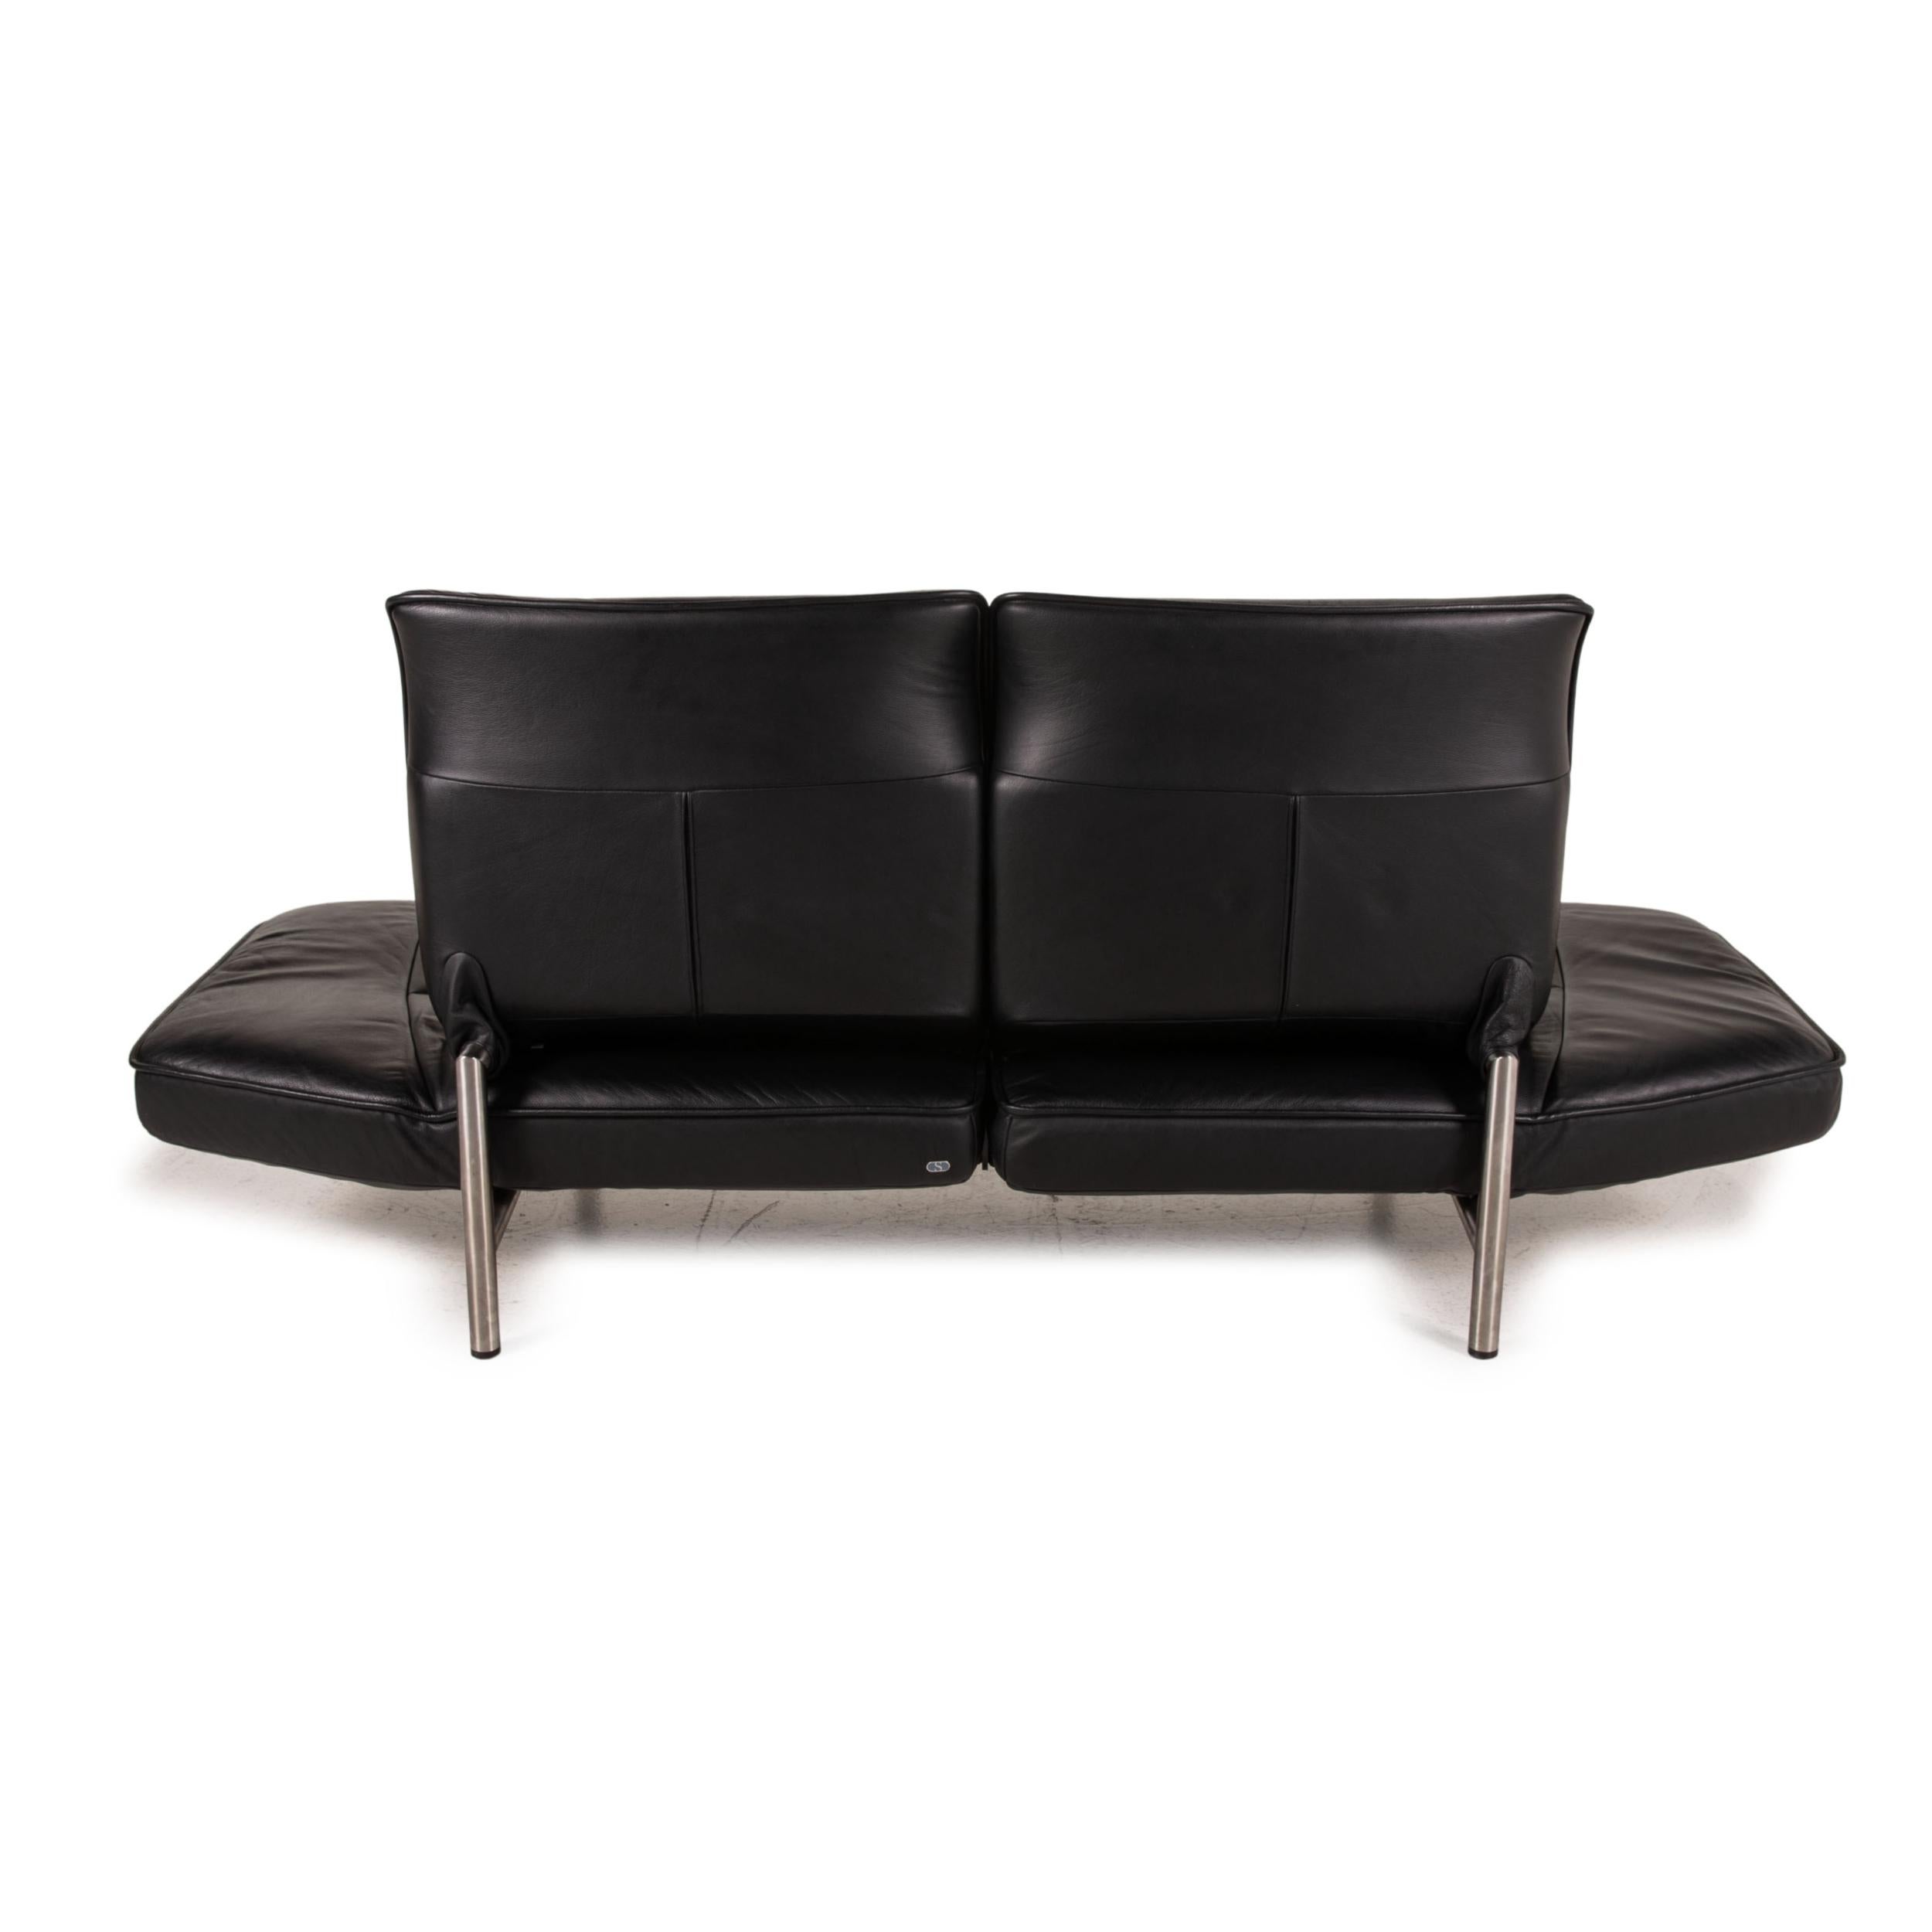 De Sede DS 450 Leather Sofa Black Two-Seater Function For Sale 2